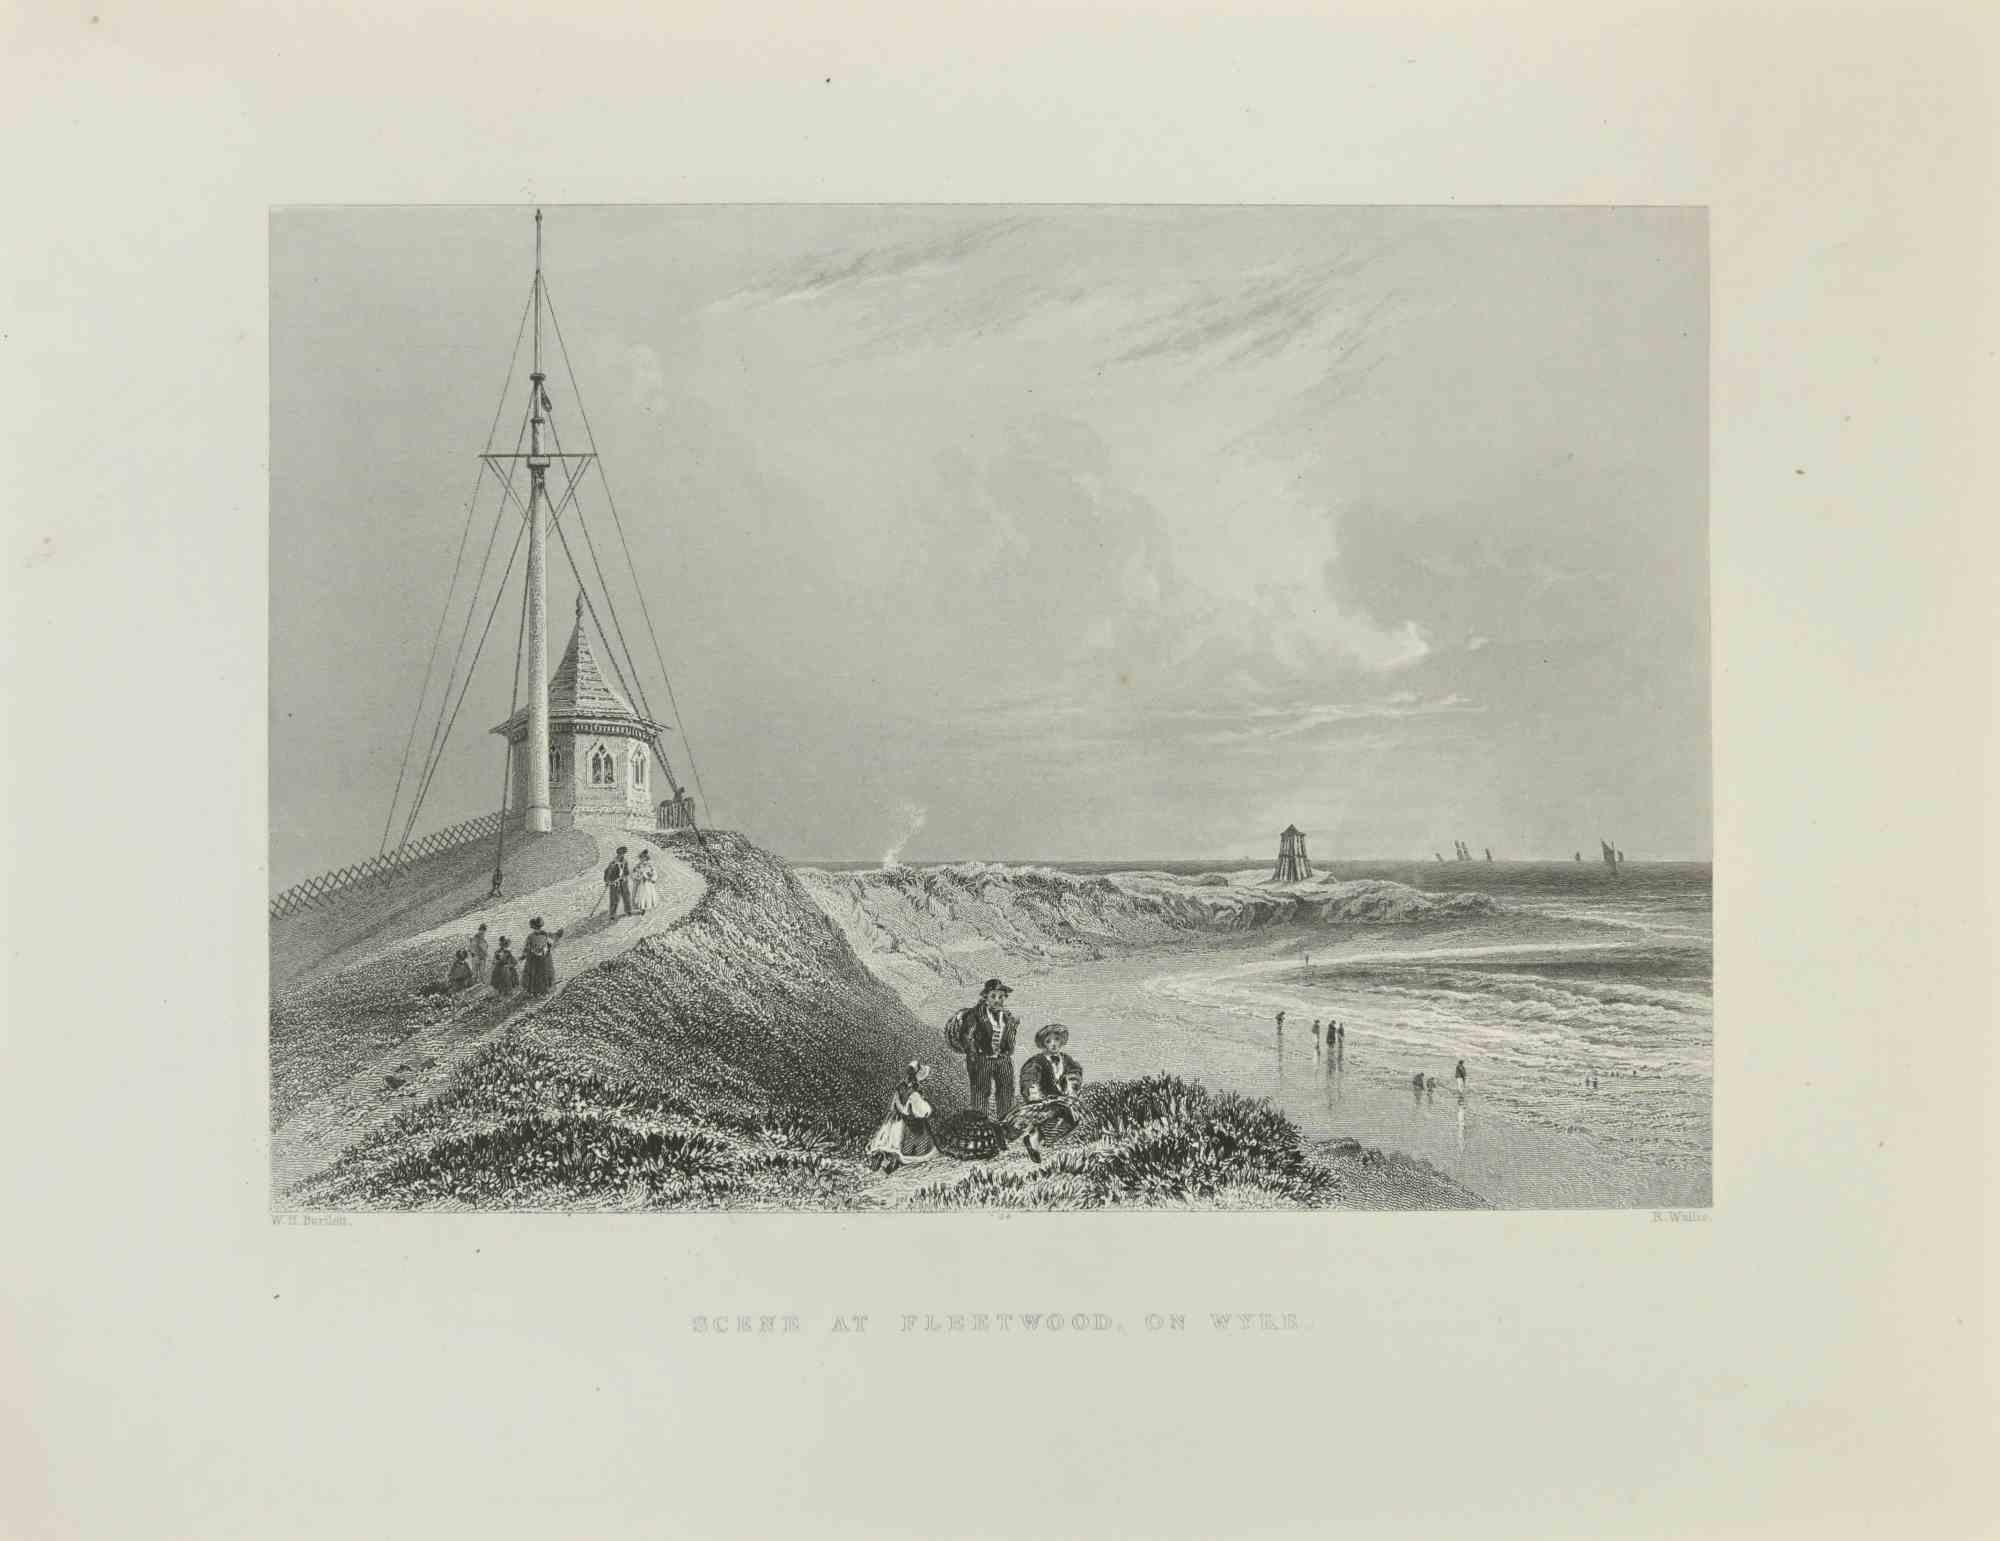 William Henry Bartlett  Figurative Print - Scene At Fleetwood - Etching By W.H. Bartlett - 1845